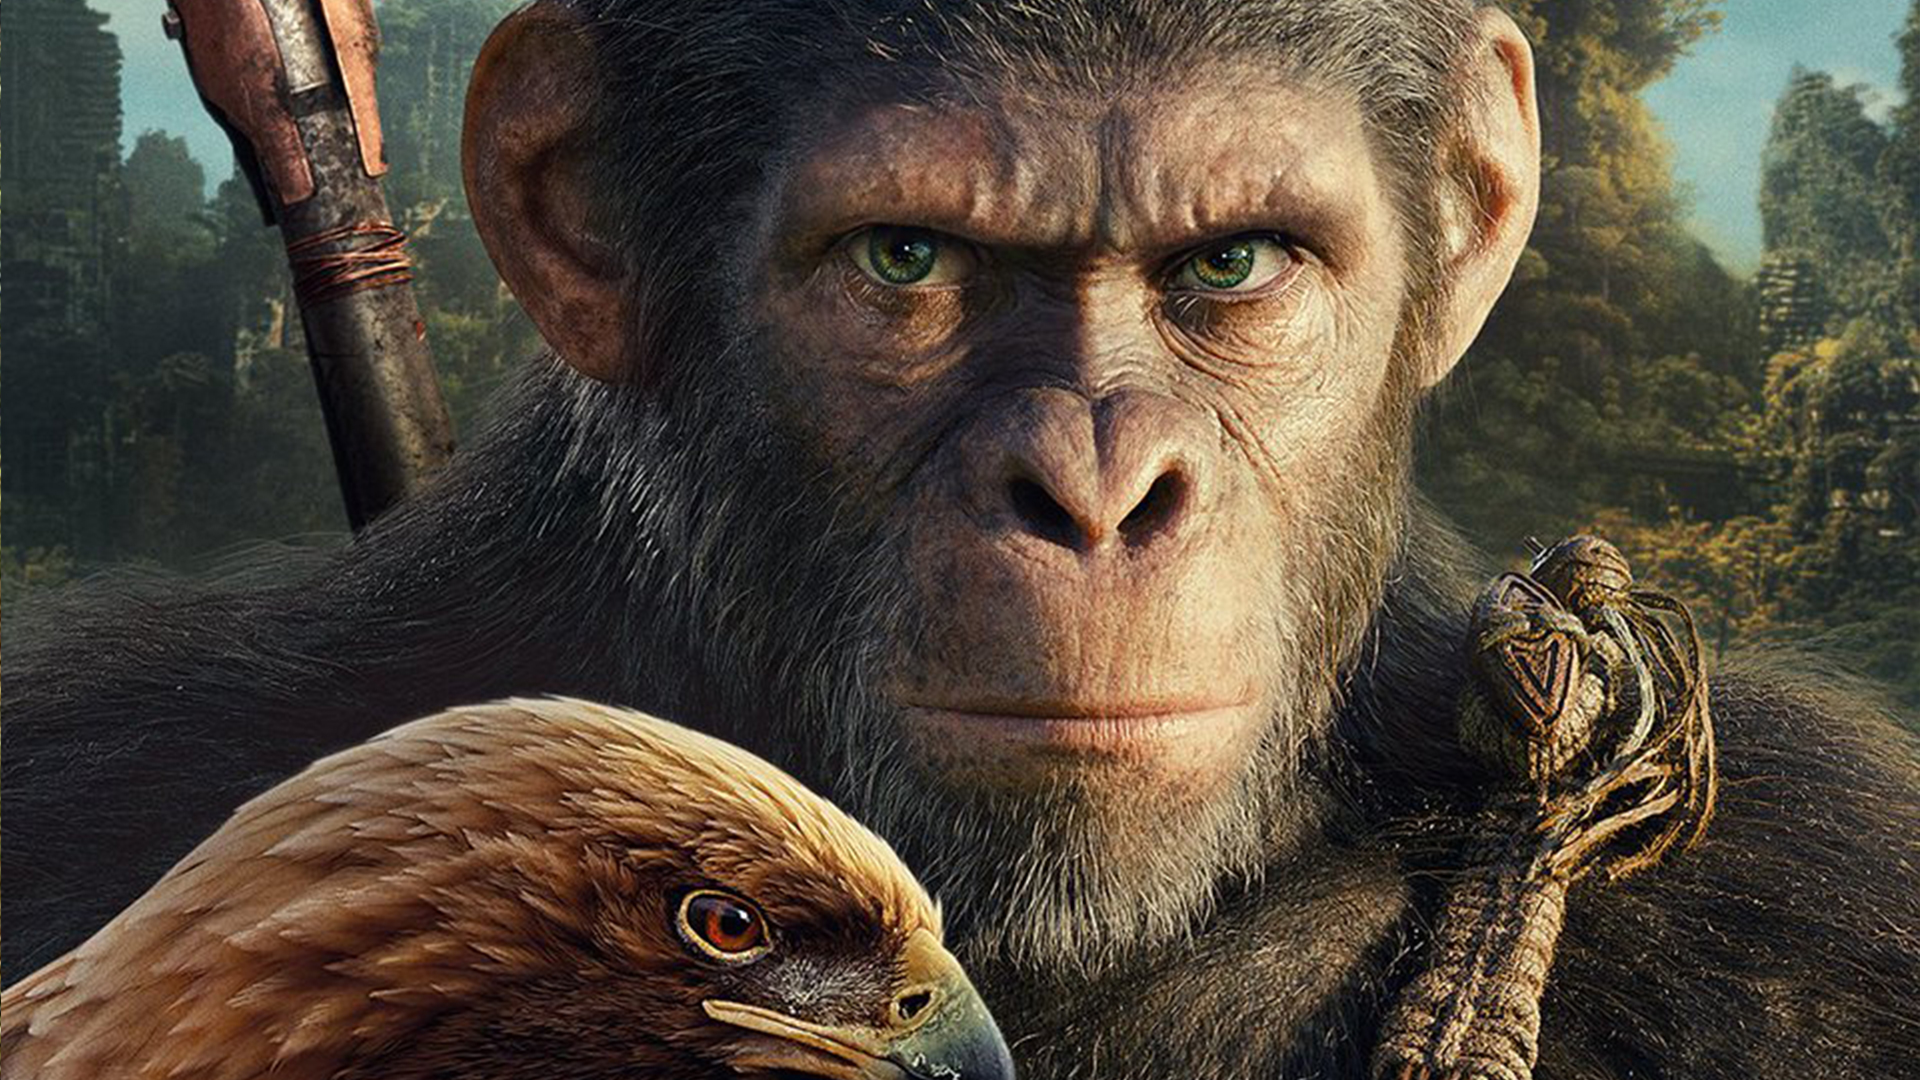 Kingdom of the of the Apes' Super Bowl trailer promises a fiery